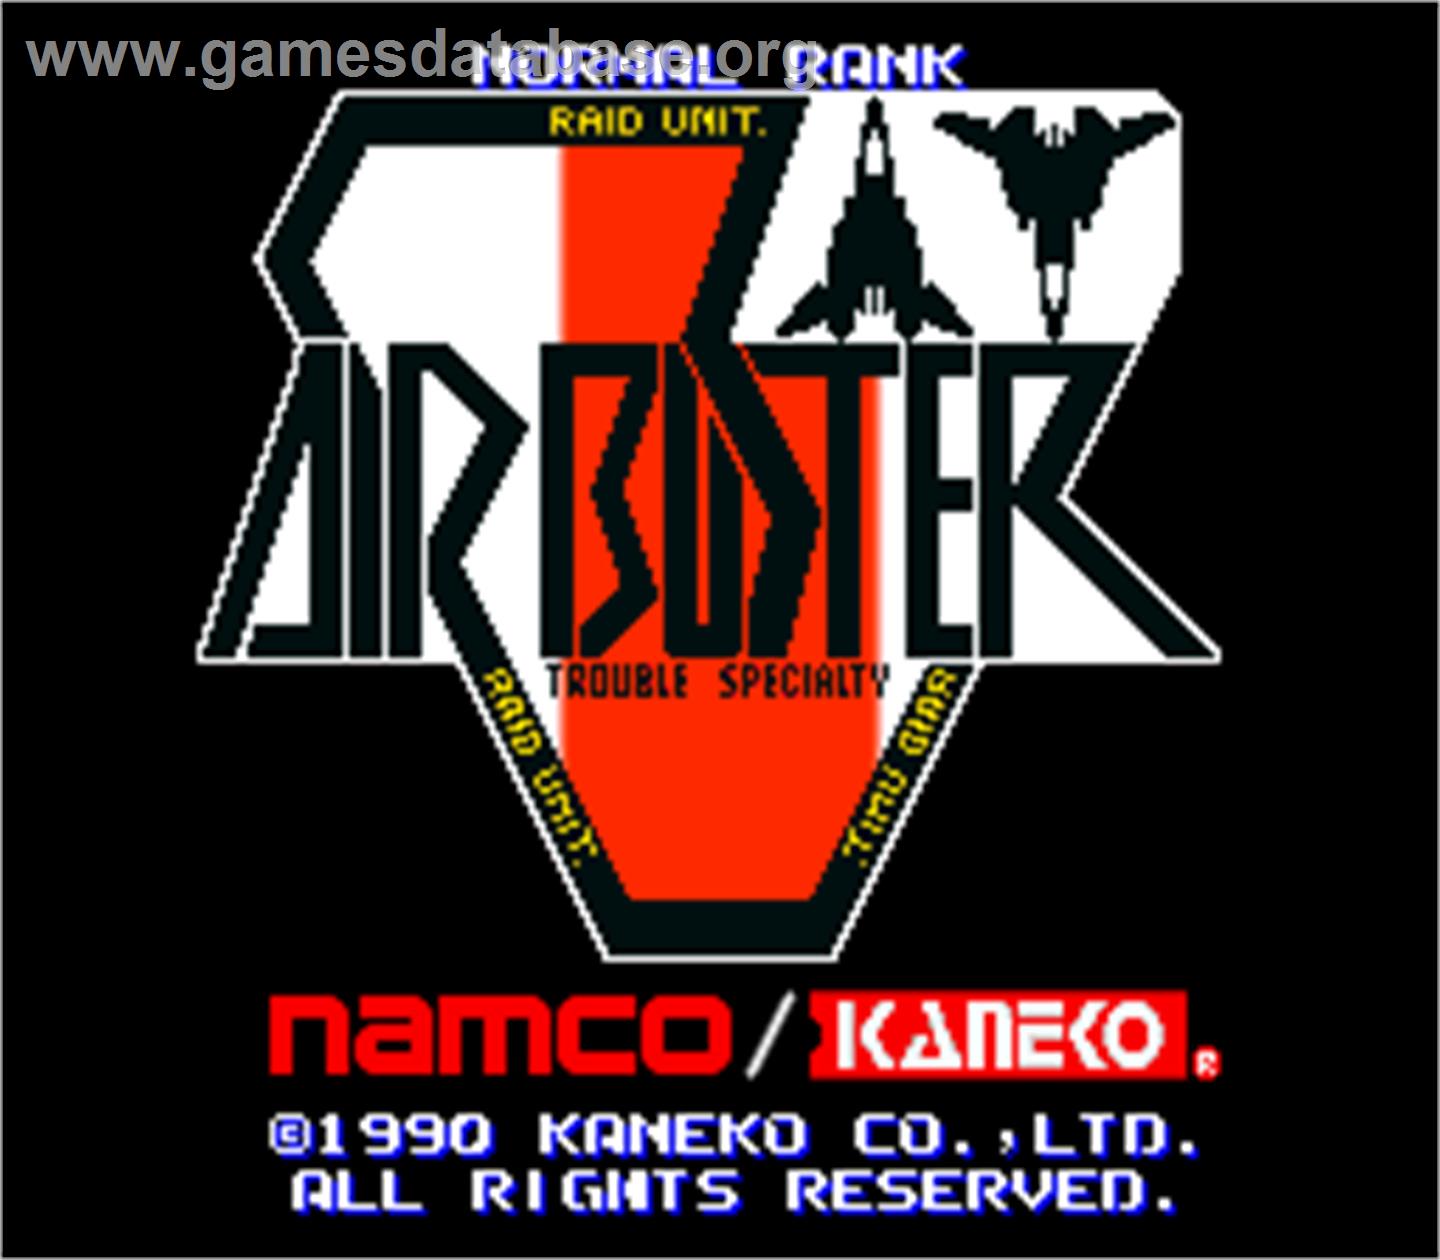 Air Buster: Trouble Specialty Raid Unit - Arcade - Artwork - Title Screen